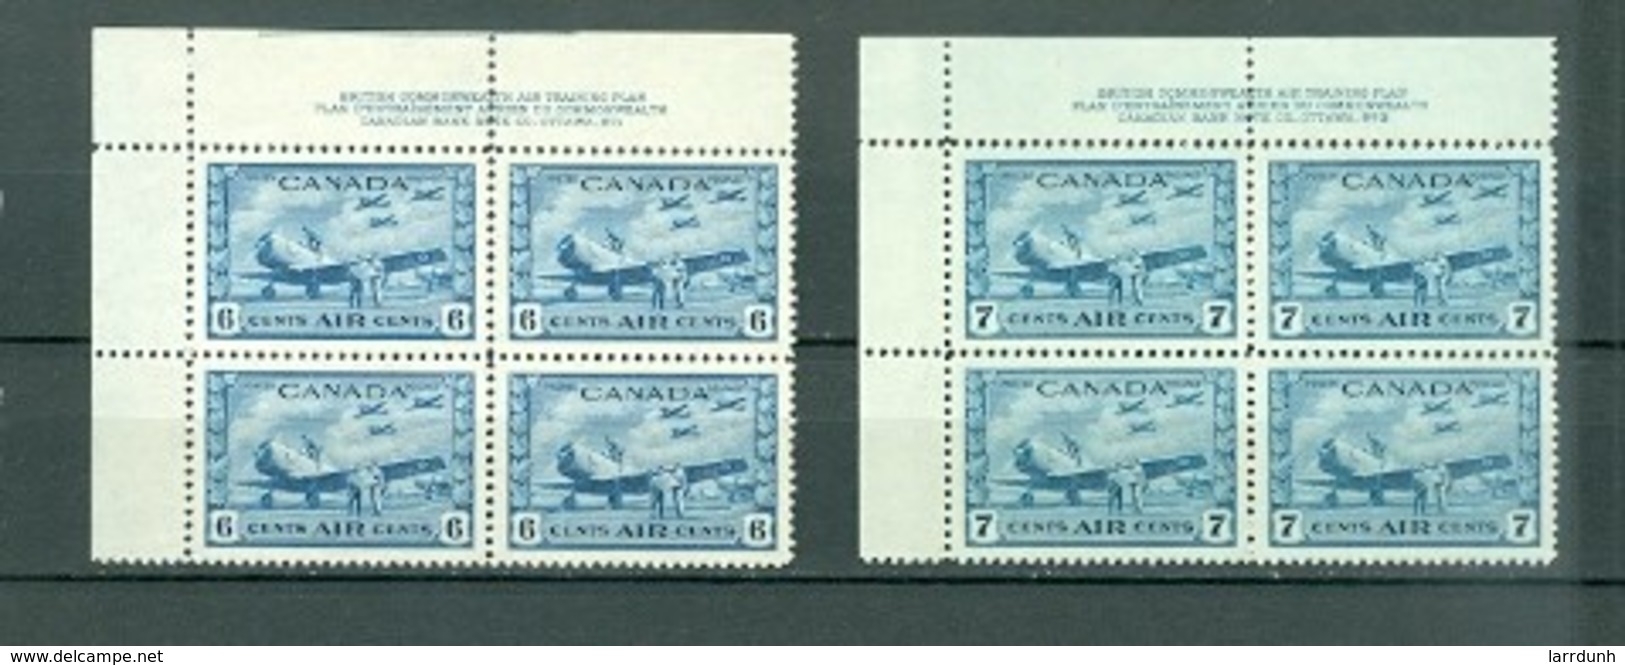 Canada C7 C8 Planes And Student Flyers British Commonwealth Air Training Plan Plate Block UL MNH 1942 1943 A04s - Poste Aérienne: Exprès